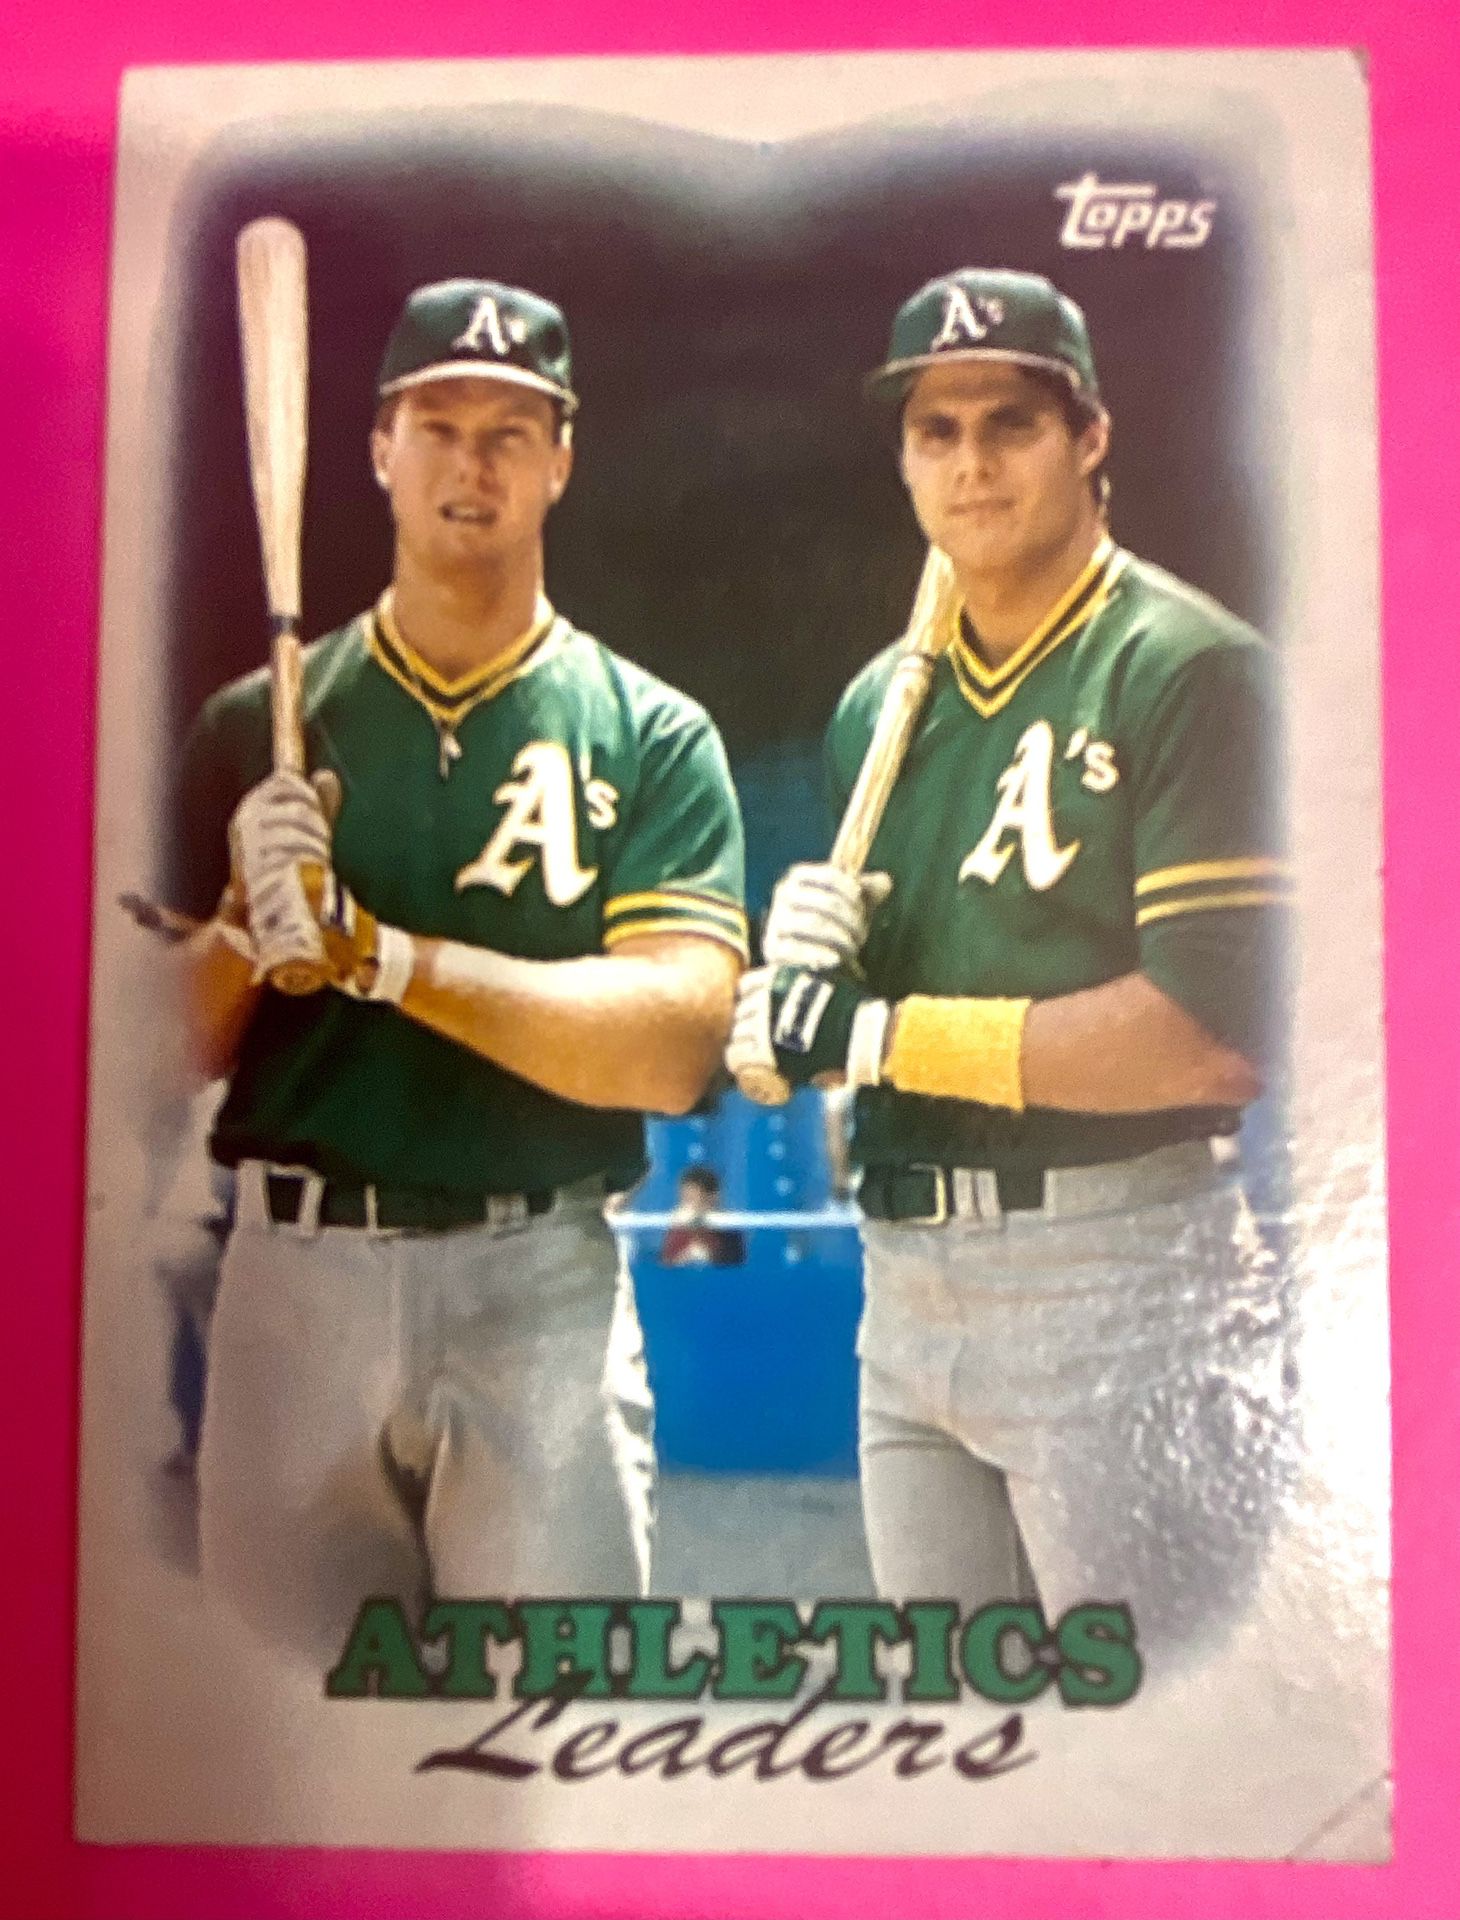 Mark McGwire 1988 Topps “Athletics Leaders” with Jose Canseco Card